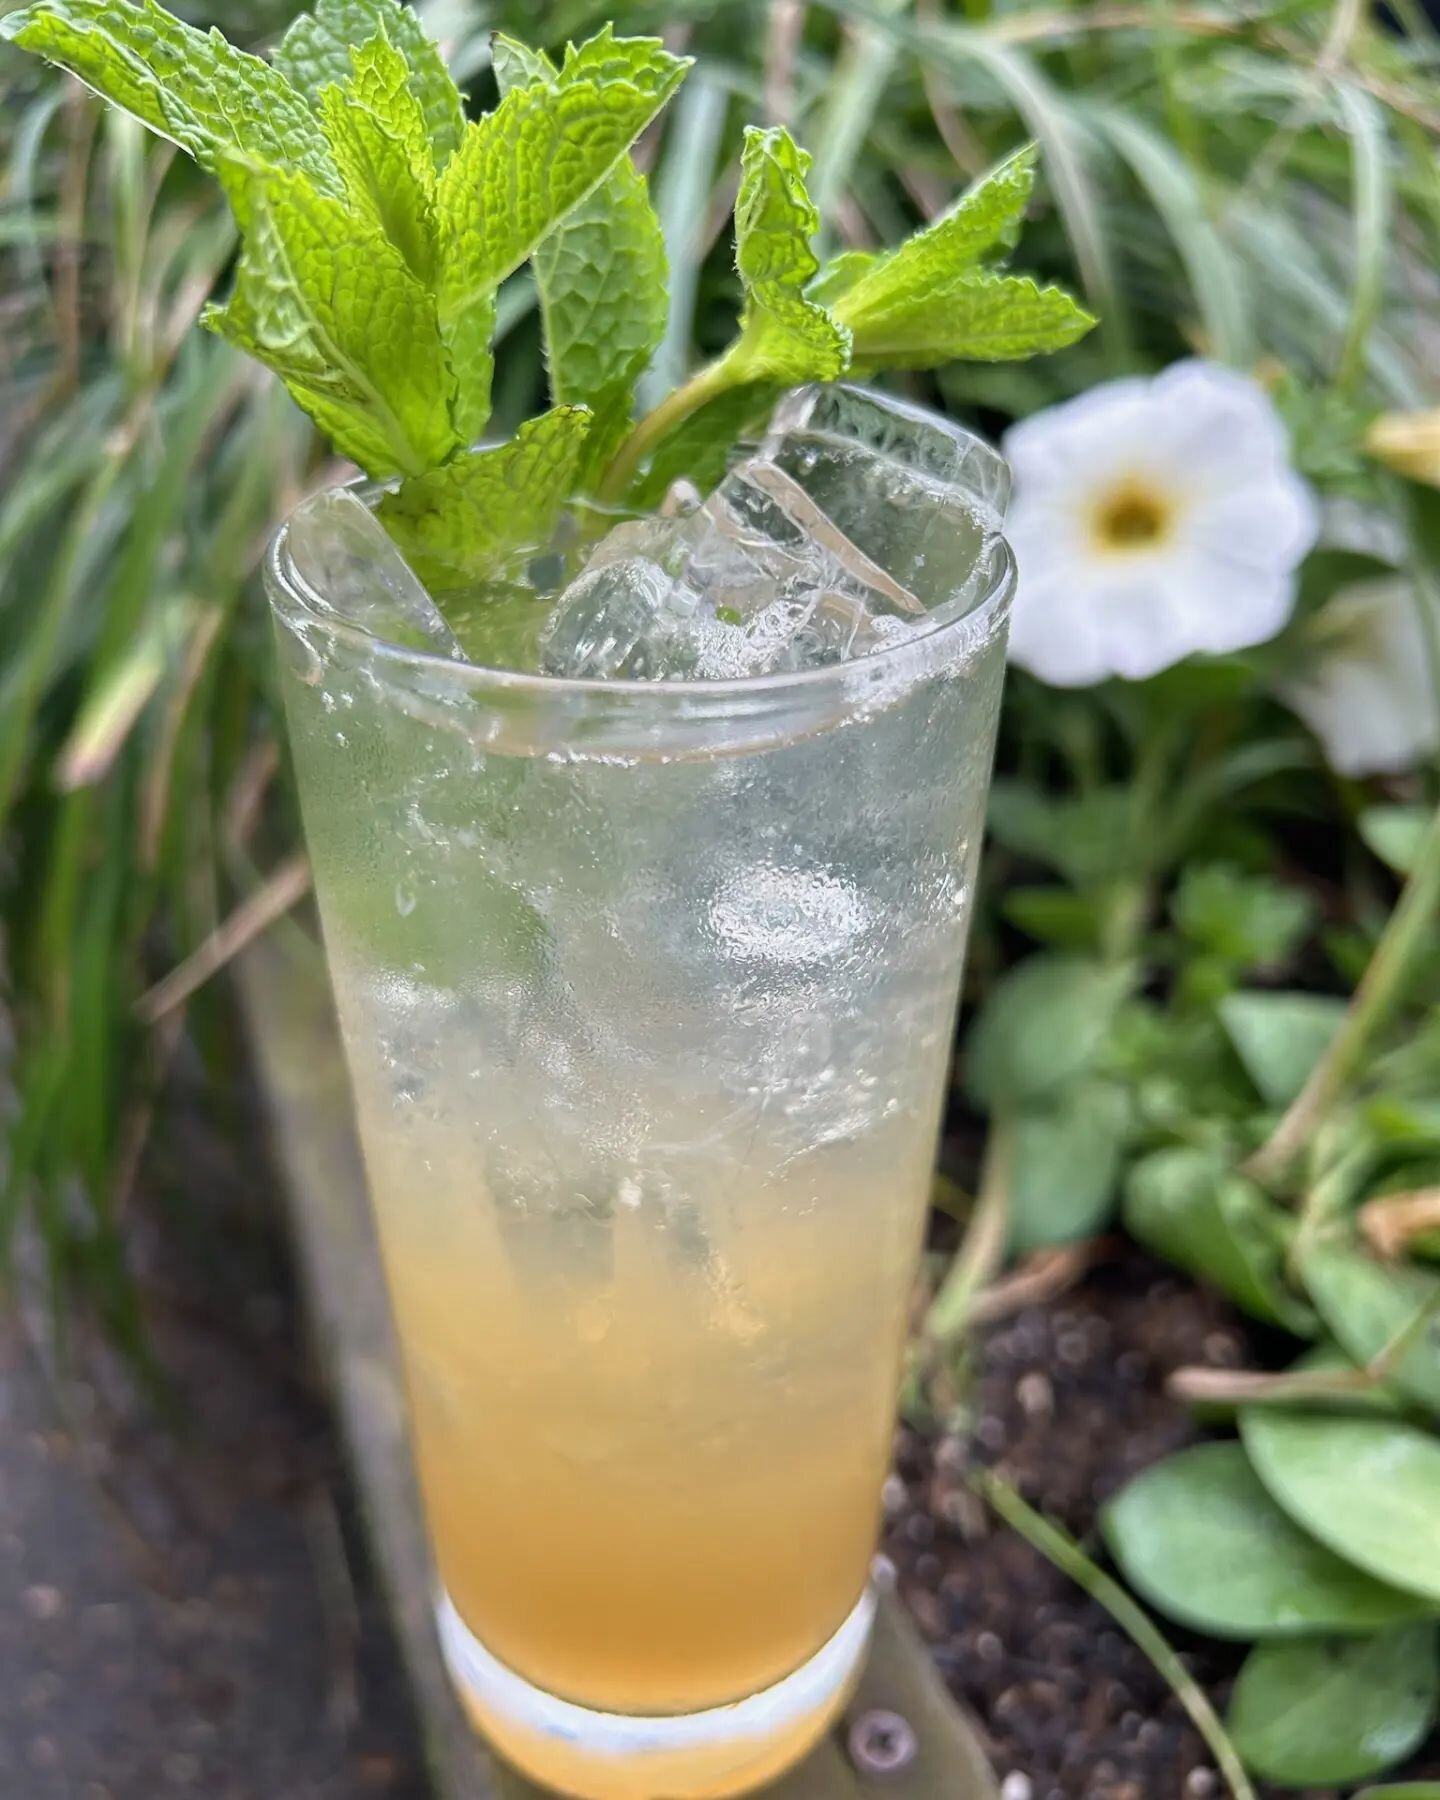 It's #kentuckyderby weekend and @efunke333 is slinging her cocktail Win, Place, Show!

-Mint-infused Bourbon, Mint Syrup, Lime, Xocolatl Mole Bitters and Soda Water

Get in before it's gone!

#pubdrinksarethebestdrinks #drink me #kentuckyderbytime #j